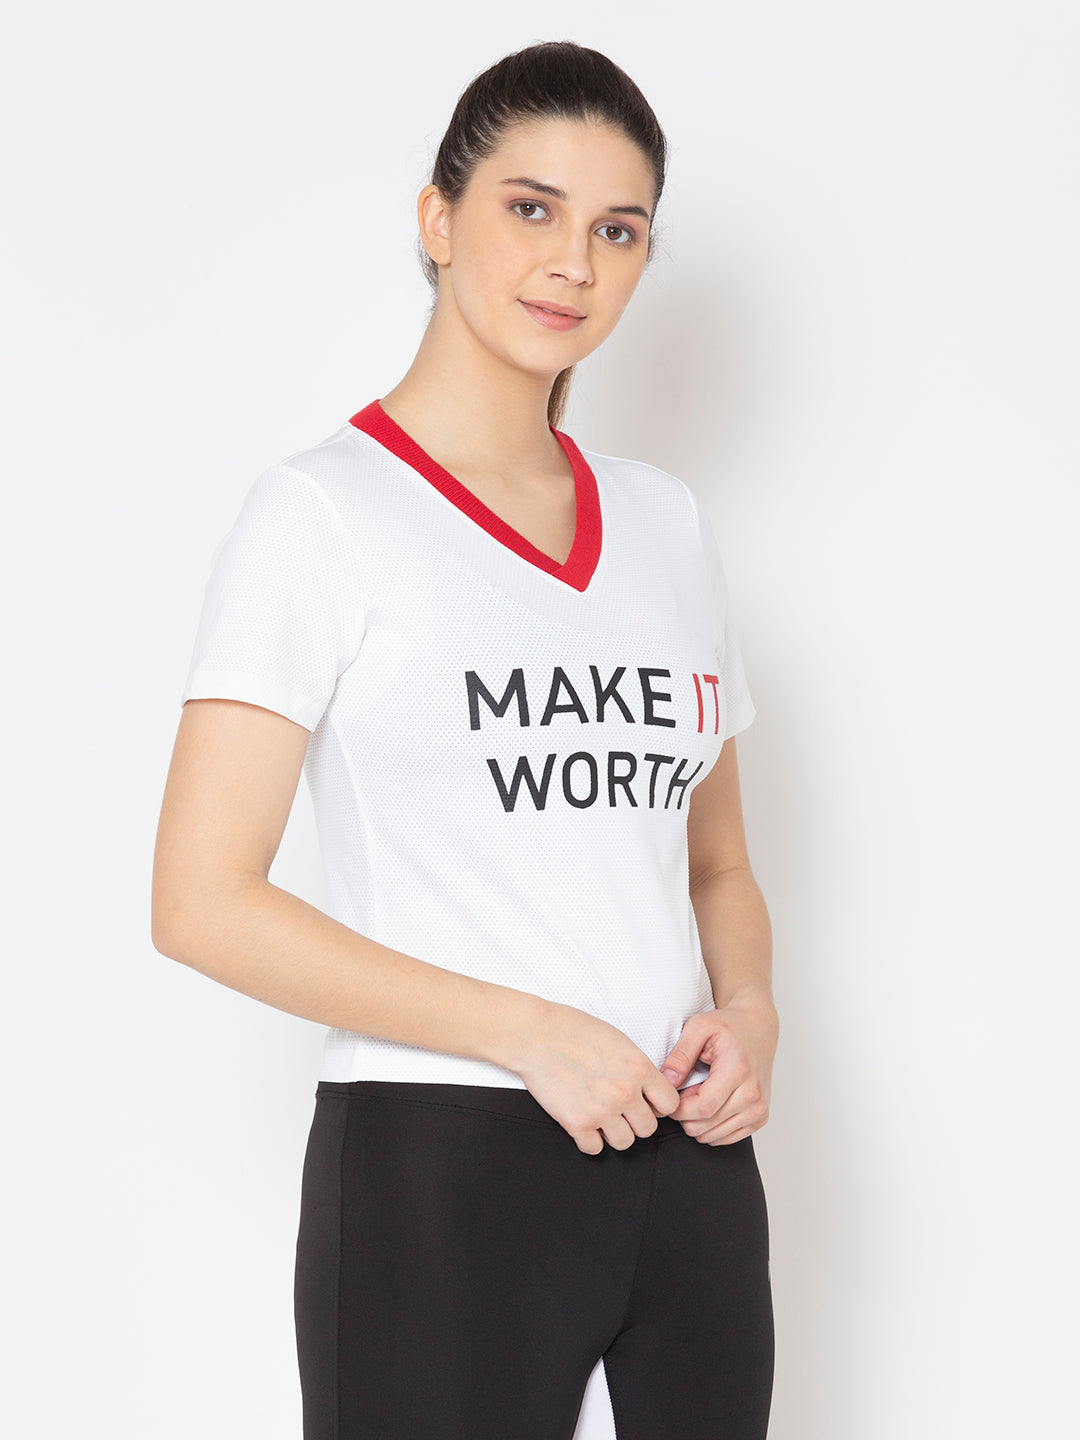 Combo of two Make it Worth T-shirts – White